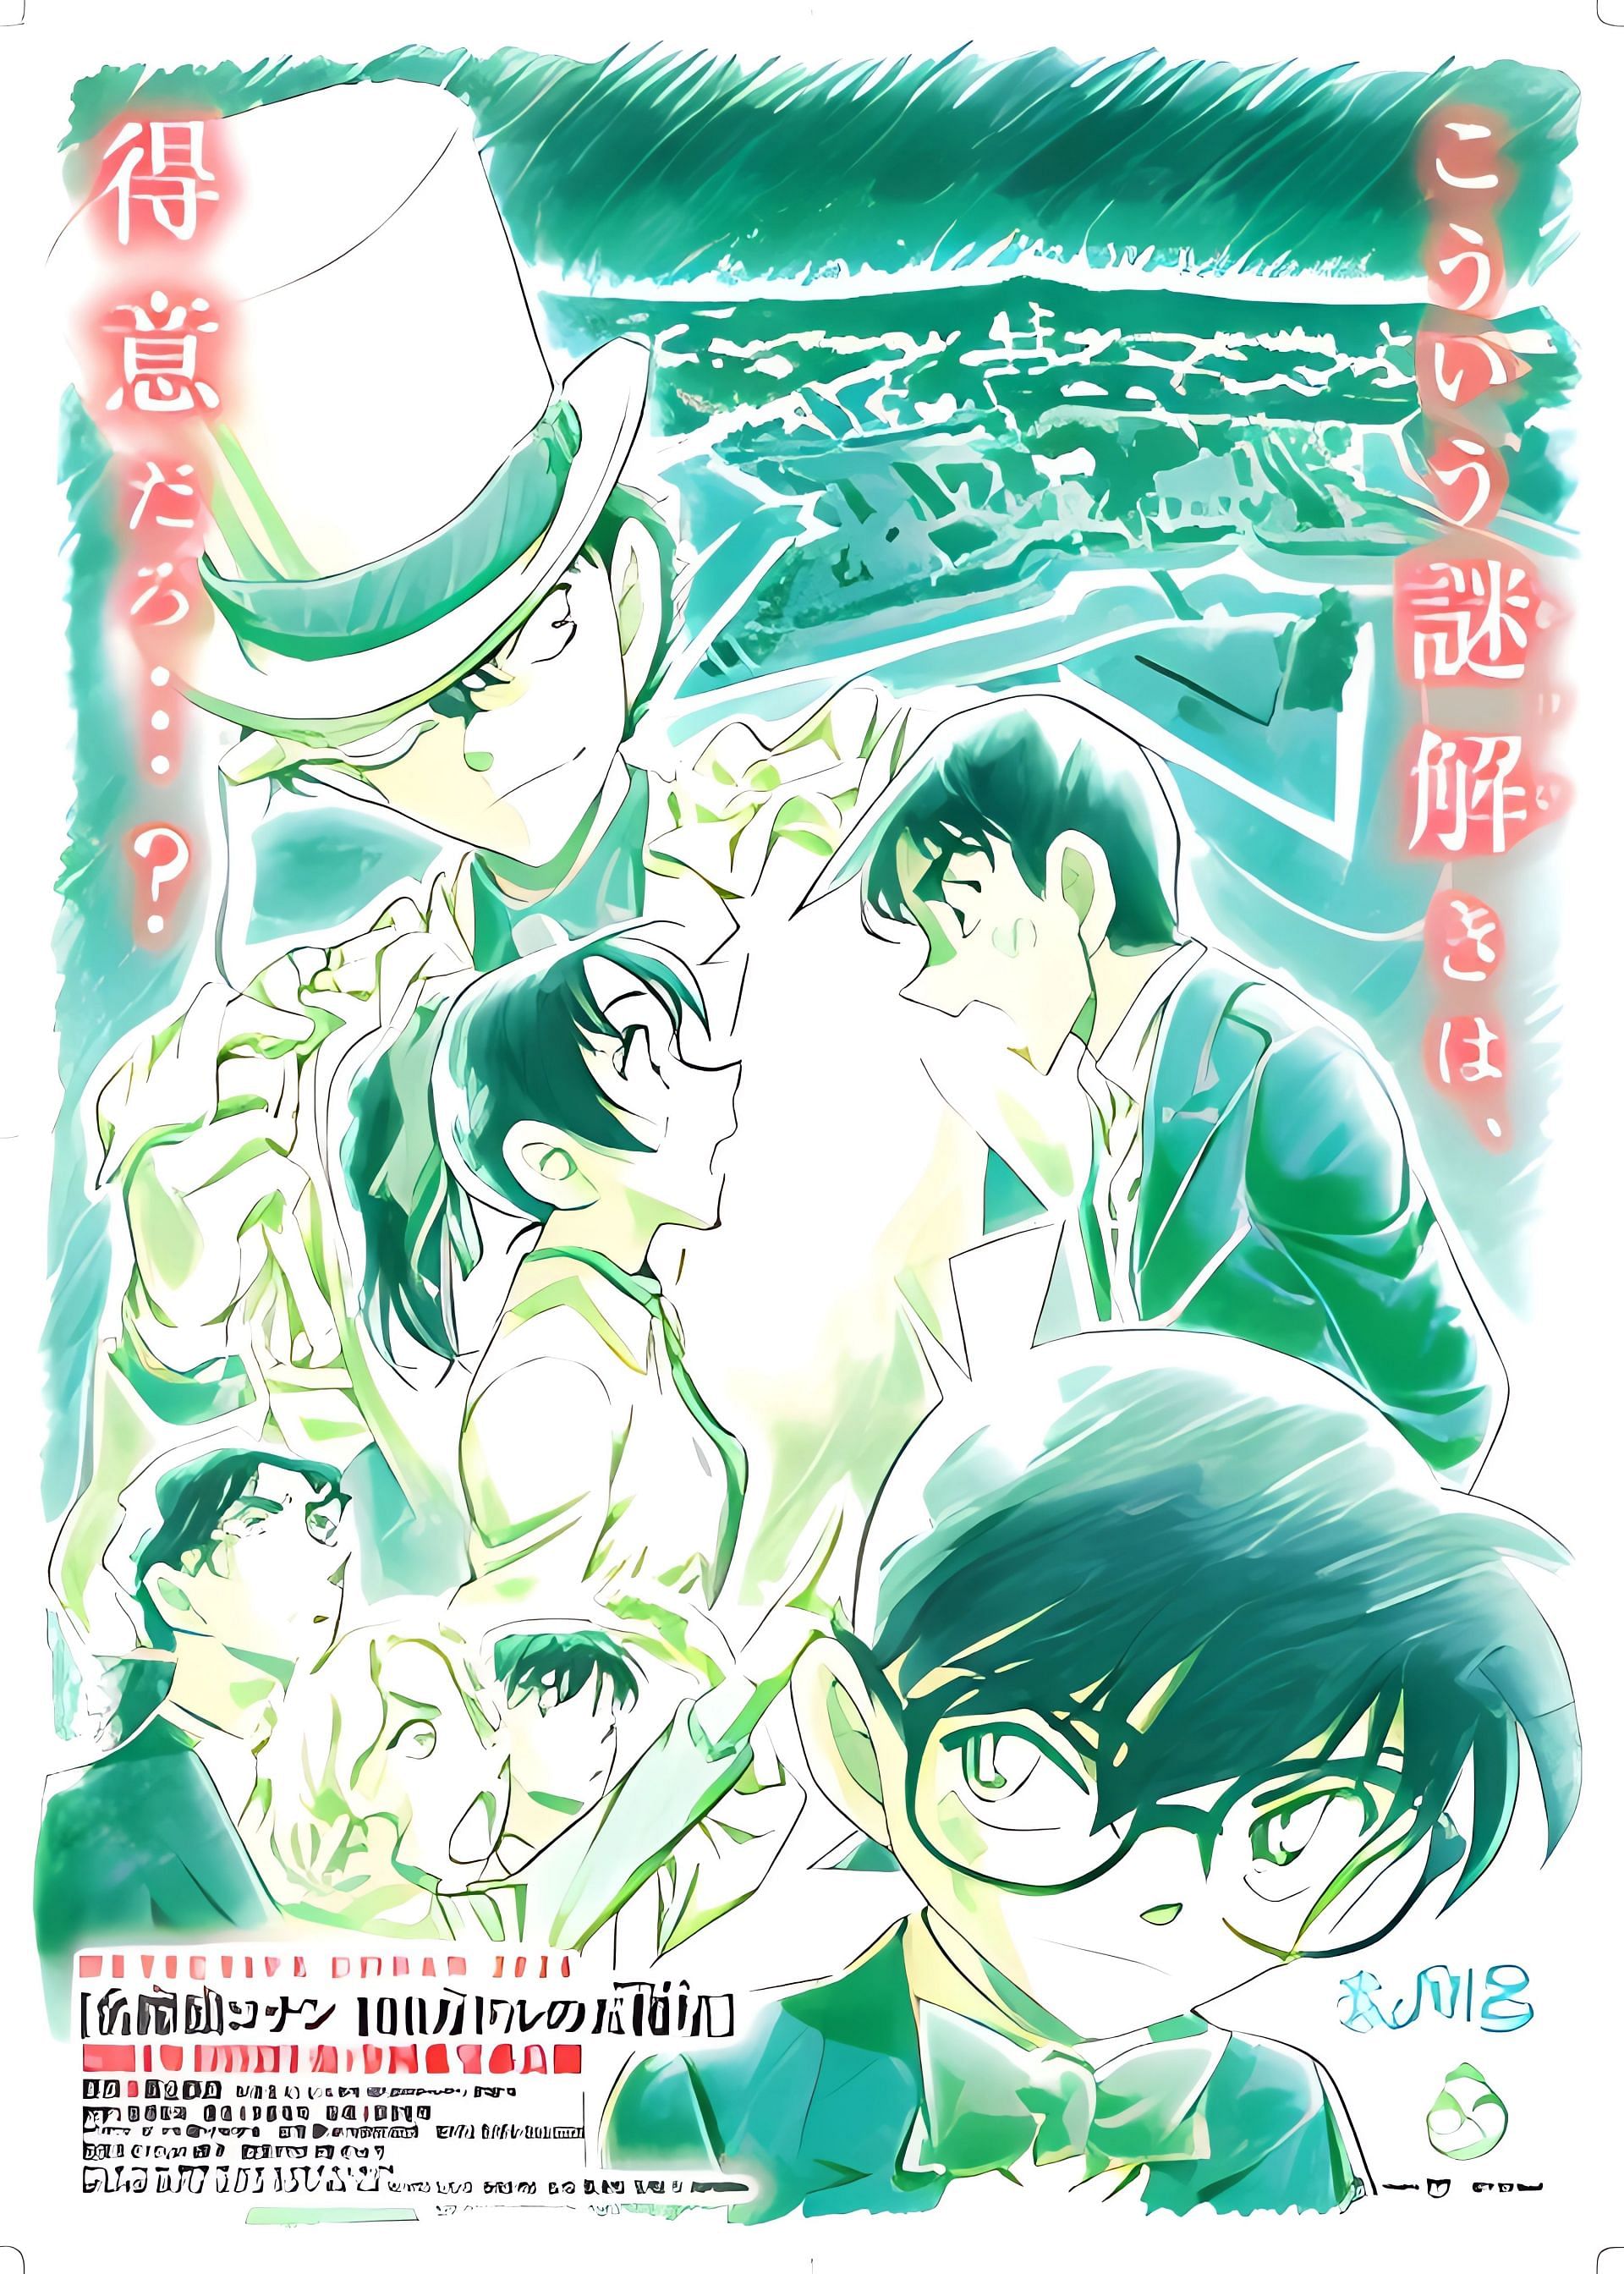 Detective Conan: The Million Dollar Five-Pointed Star main poster (Image via TMS Entertainment)